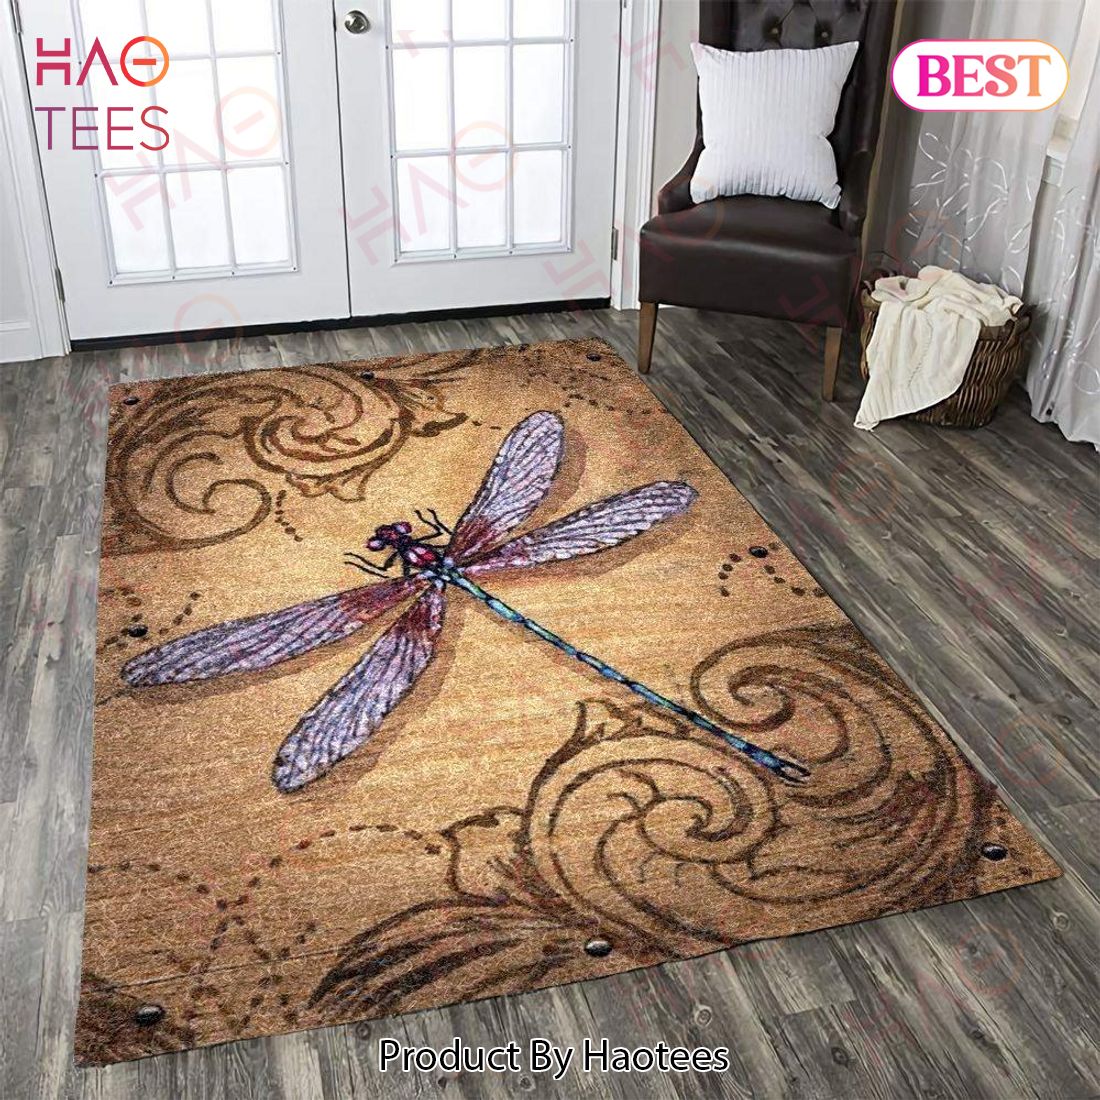 Dragonfly Limited Edition Area Rugs Carpet Mat Kitchen Rugs Floor Decor - DR31